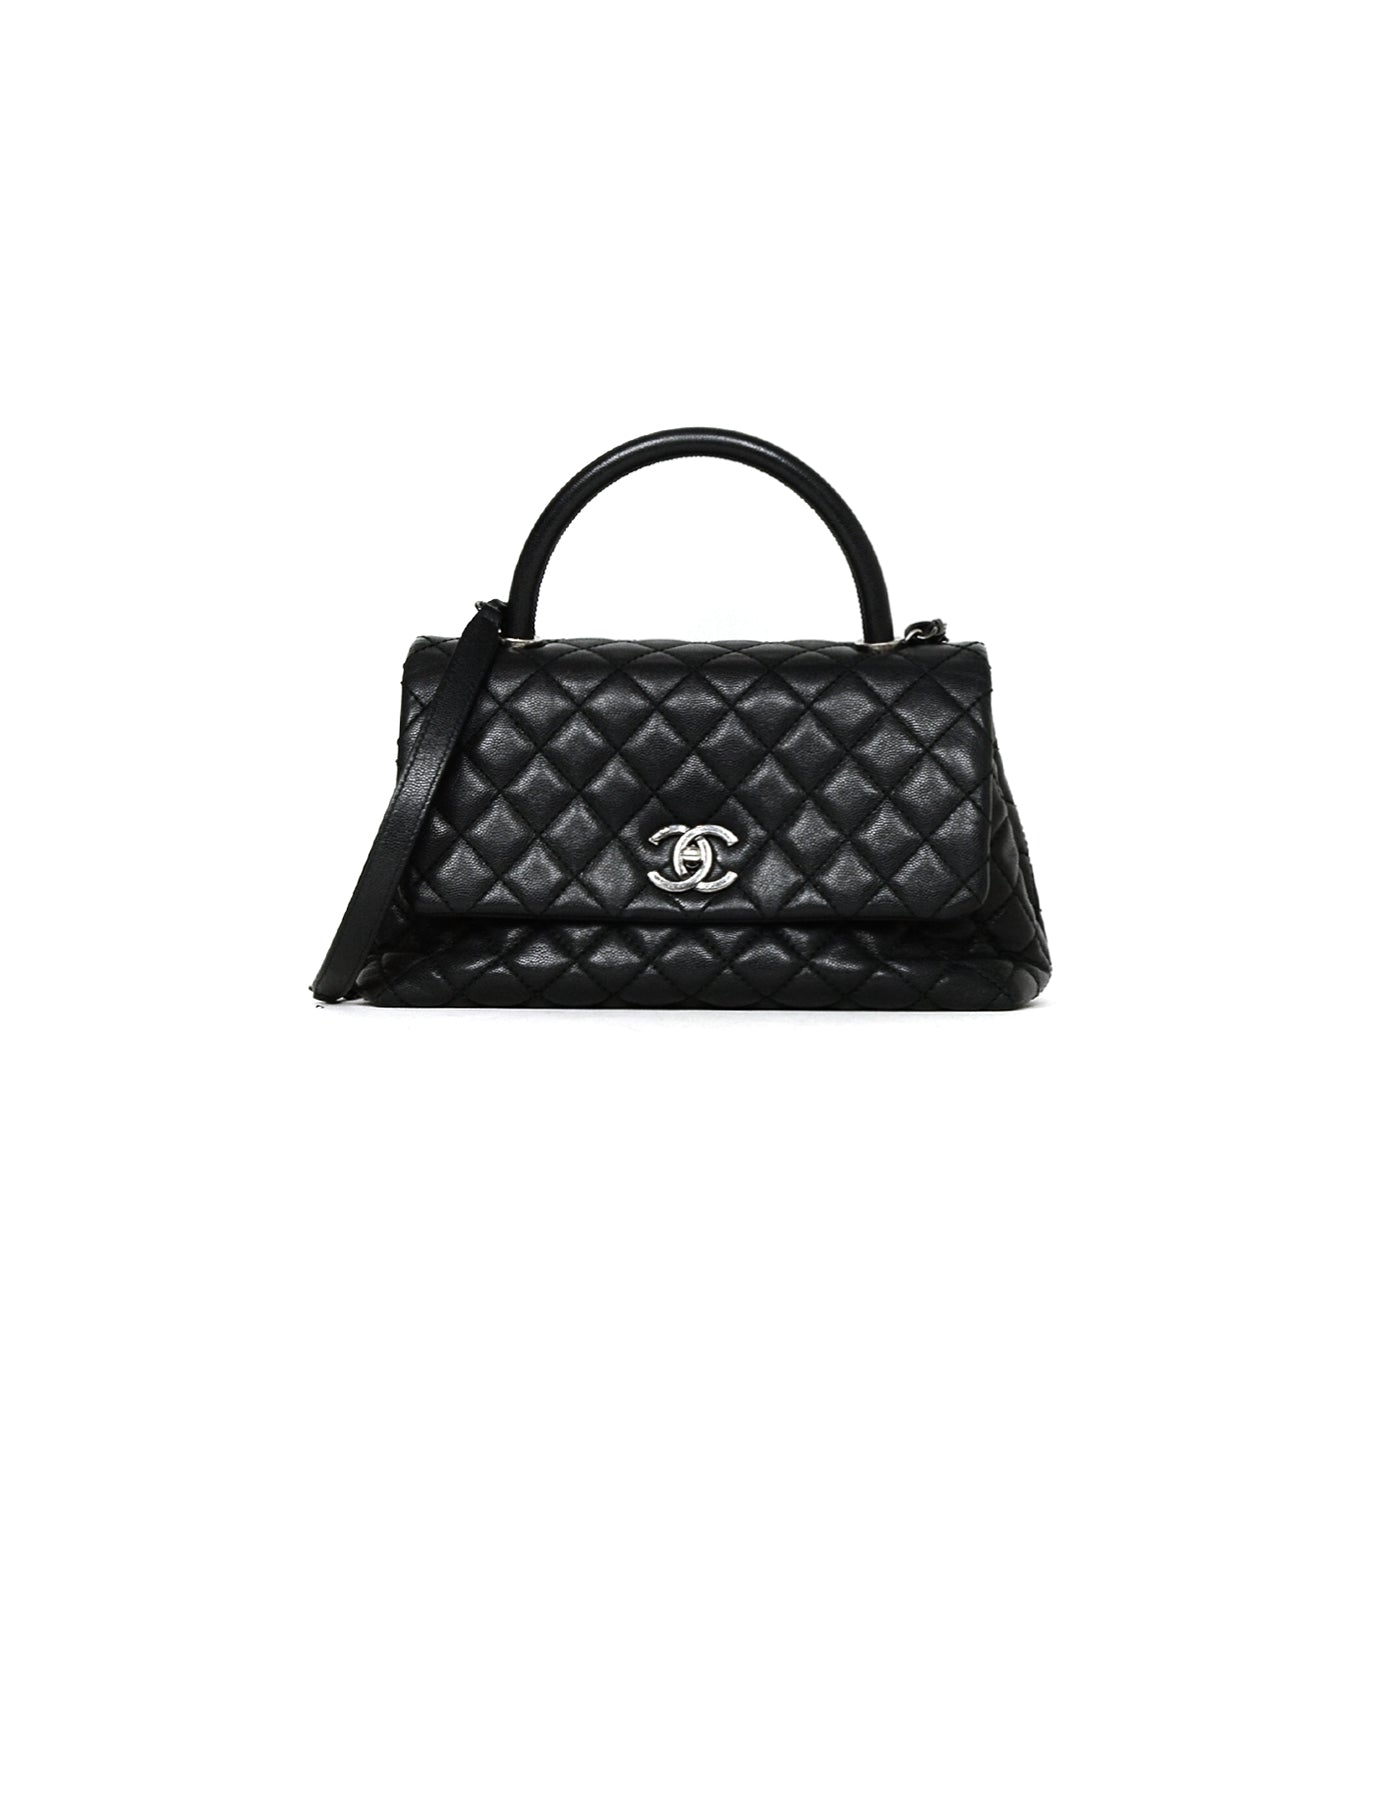 Chanel Black Caviar Quilted Small Coco Handle Flap Bag